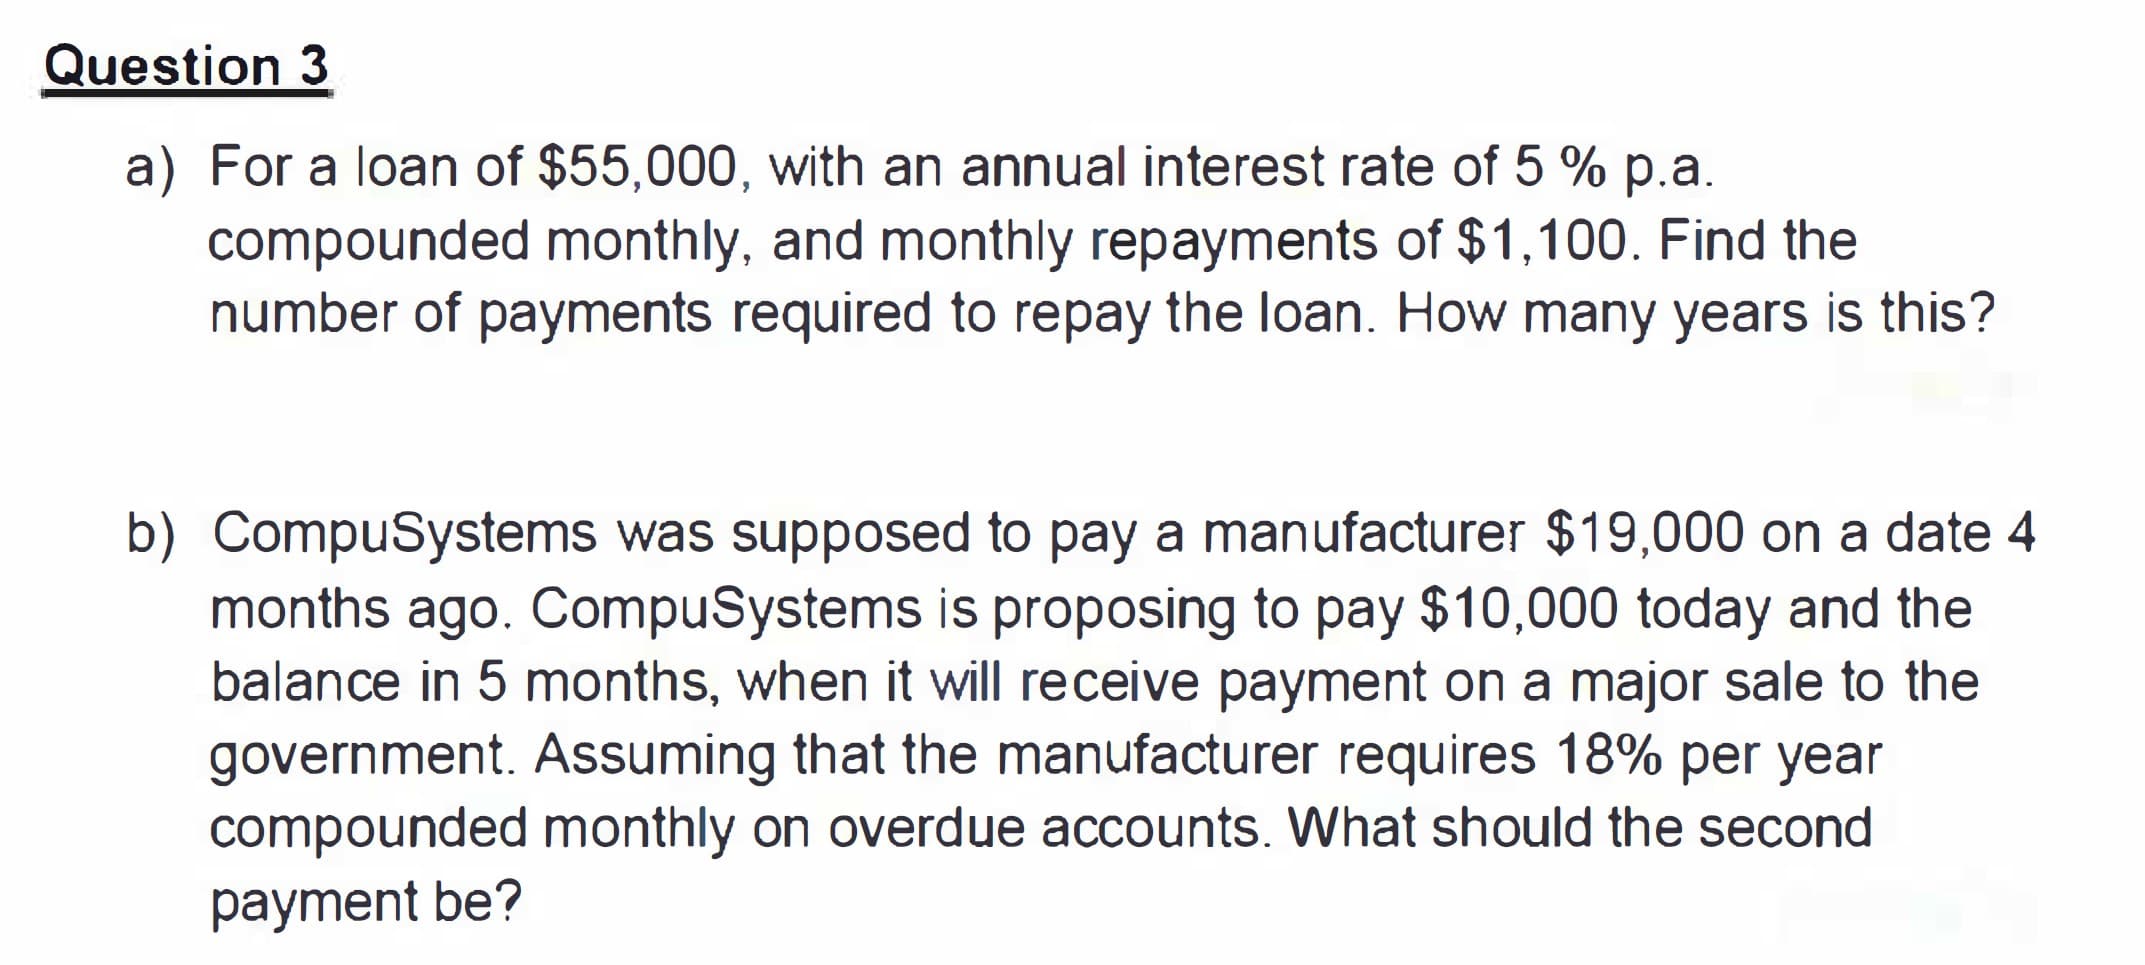 a) For a loan of $55,000, with an annual interest rate of 5 % p.a.
compounded monthly, and monthly repayments of $1,100. Find the
number of payments required to repay the loan. How many years is this?
b) CompuSystems was supposed to pay a manufacturer $19,000 on a date 4
months ago. CompuSystems is proposing to pay $10,000 today and the
balance in 5 months, when it will receive payment on a major sale to the
government. Assuming that the manufacturer requires 18% per year
compounded monthly on overdue accounts. What should the second
payment be?
